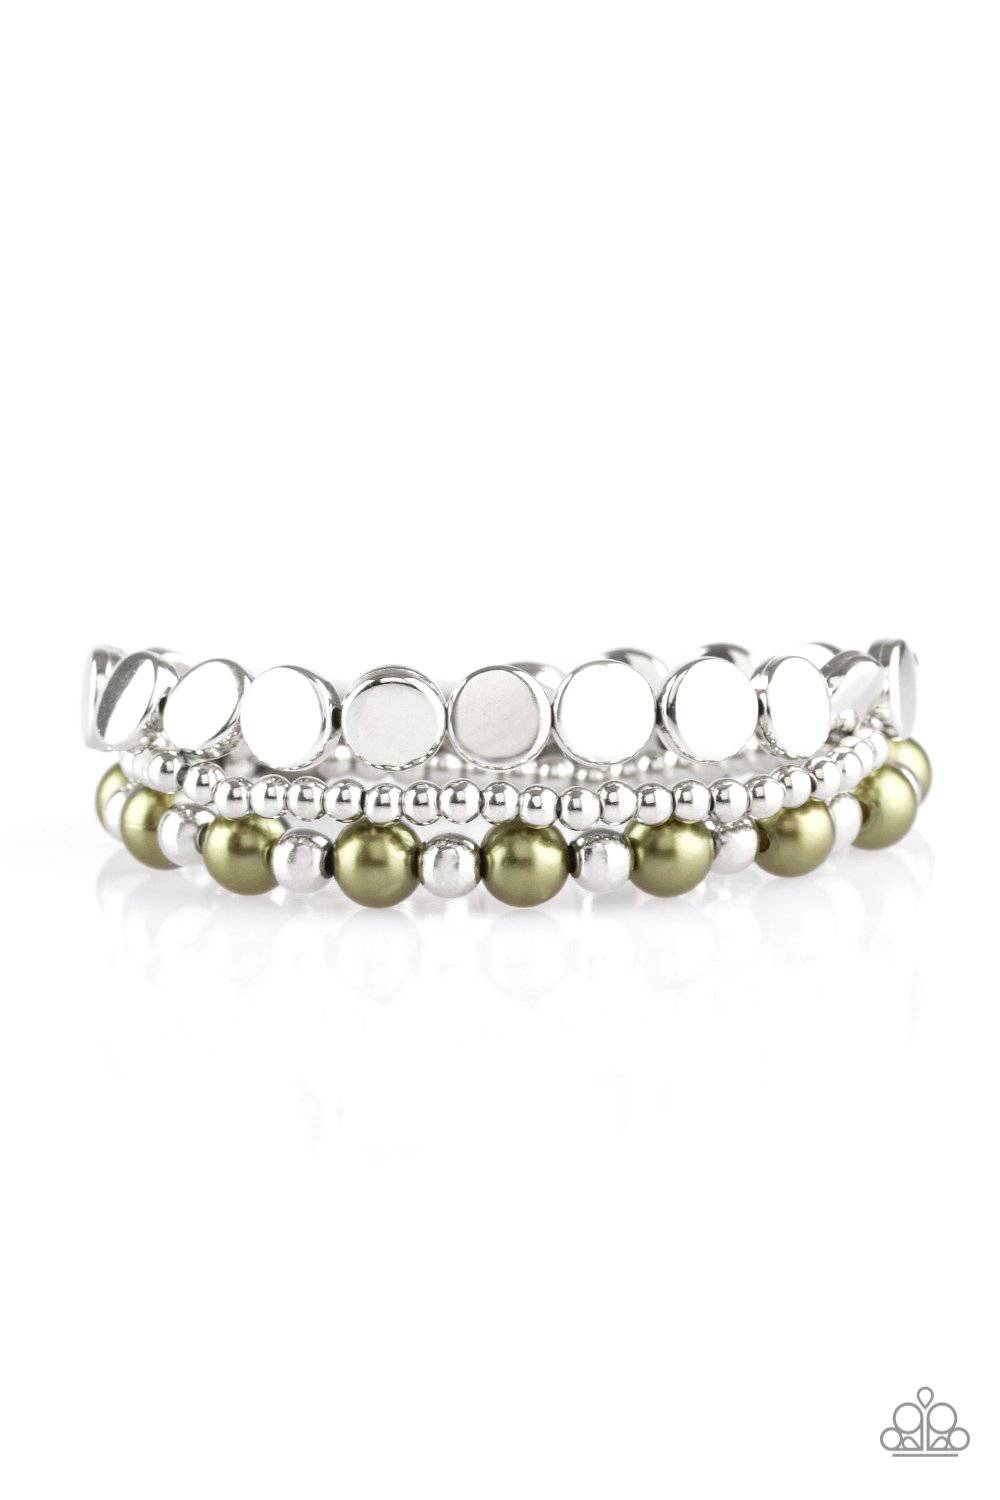 Girly Girl Glamour - Pearly Green Stretchy Bracelet - Paparazzi Accessories - GlaMarous Titi Jewels